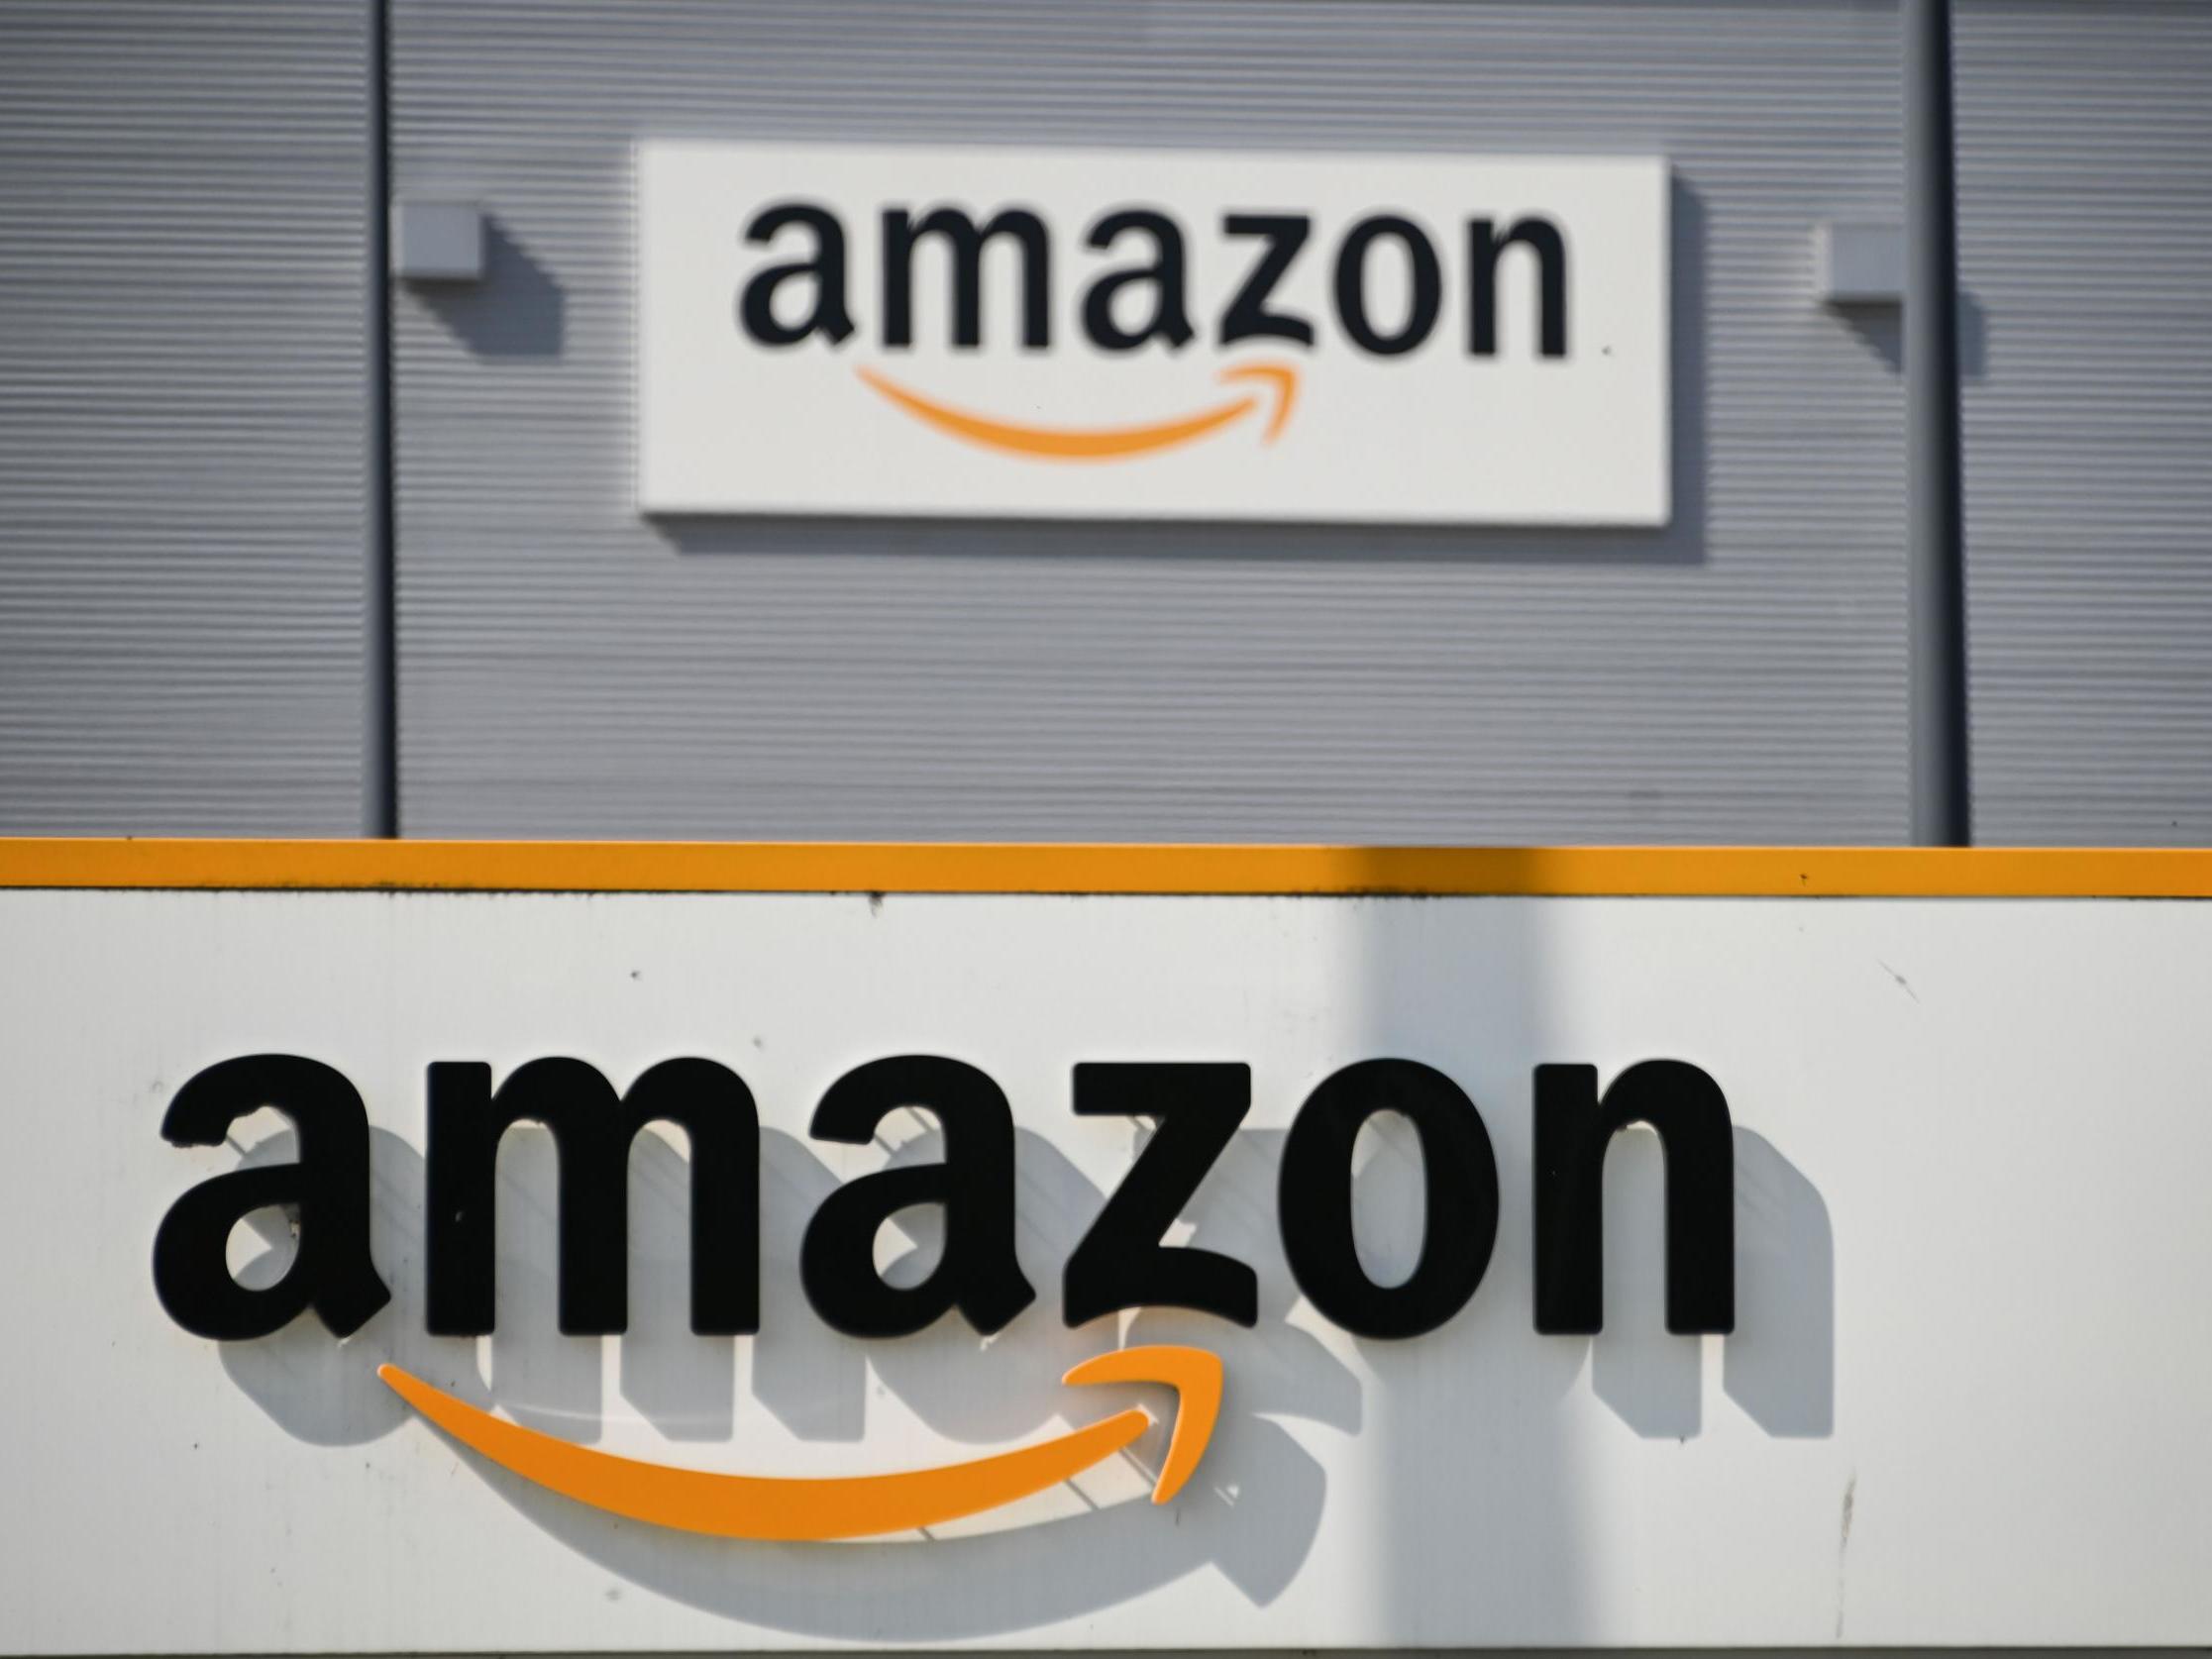 Amazon climate group plan employee 'sickout' in protest of treatment of workers